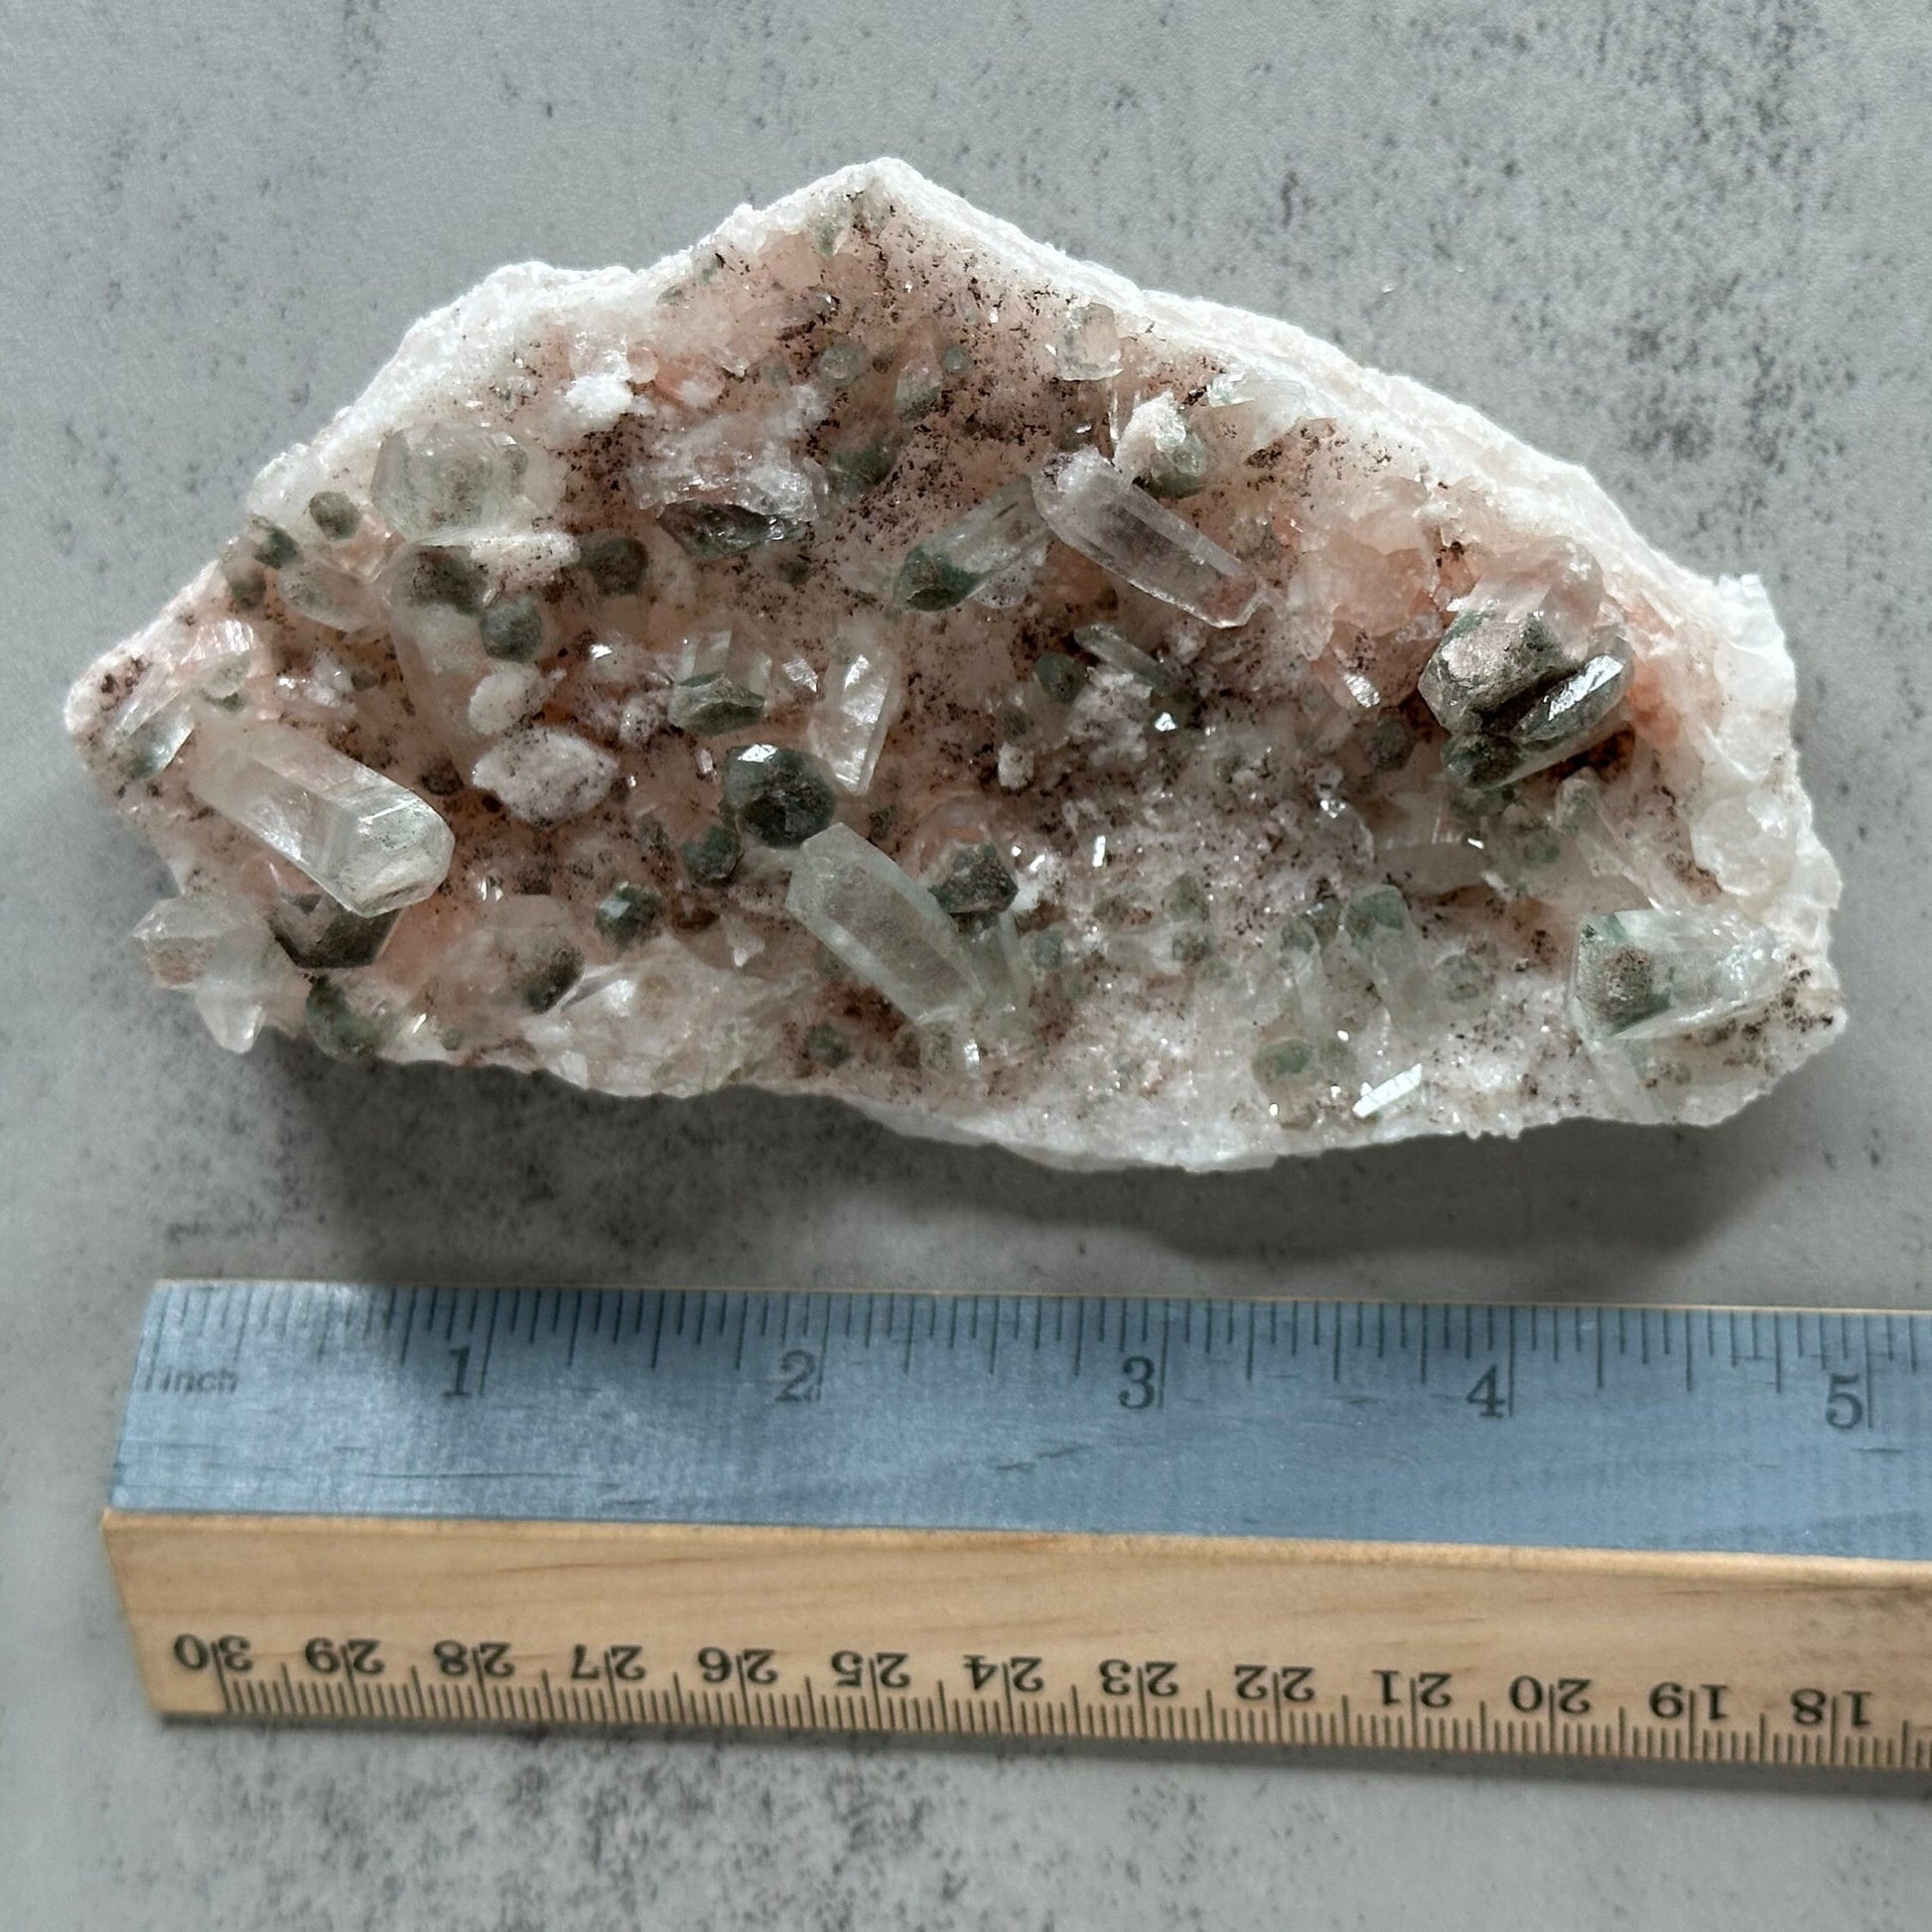 Beautiful Pink Himalayan Samadhi Quartz With Chlorite High-Quality Genuine Specimen Crystal from India | Tucson Gem Show Exclusive